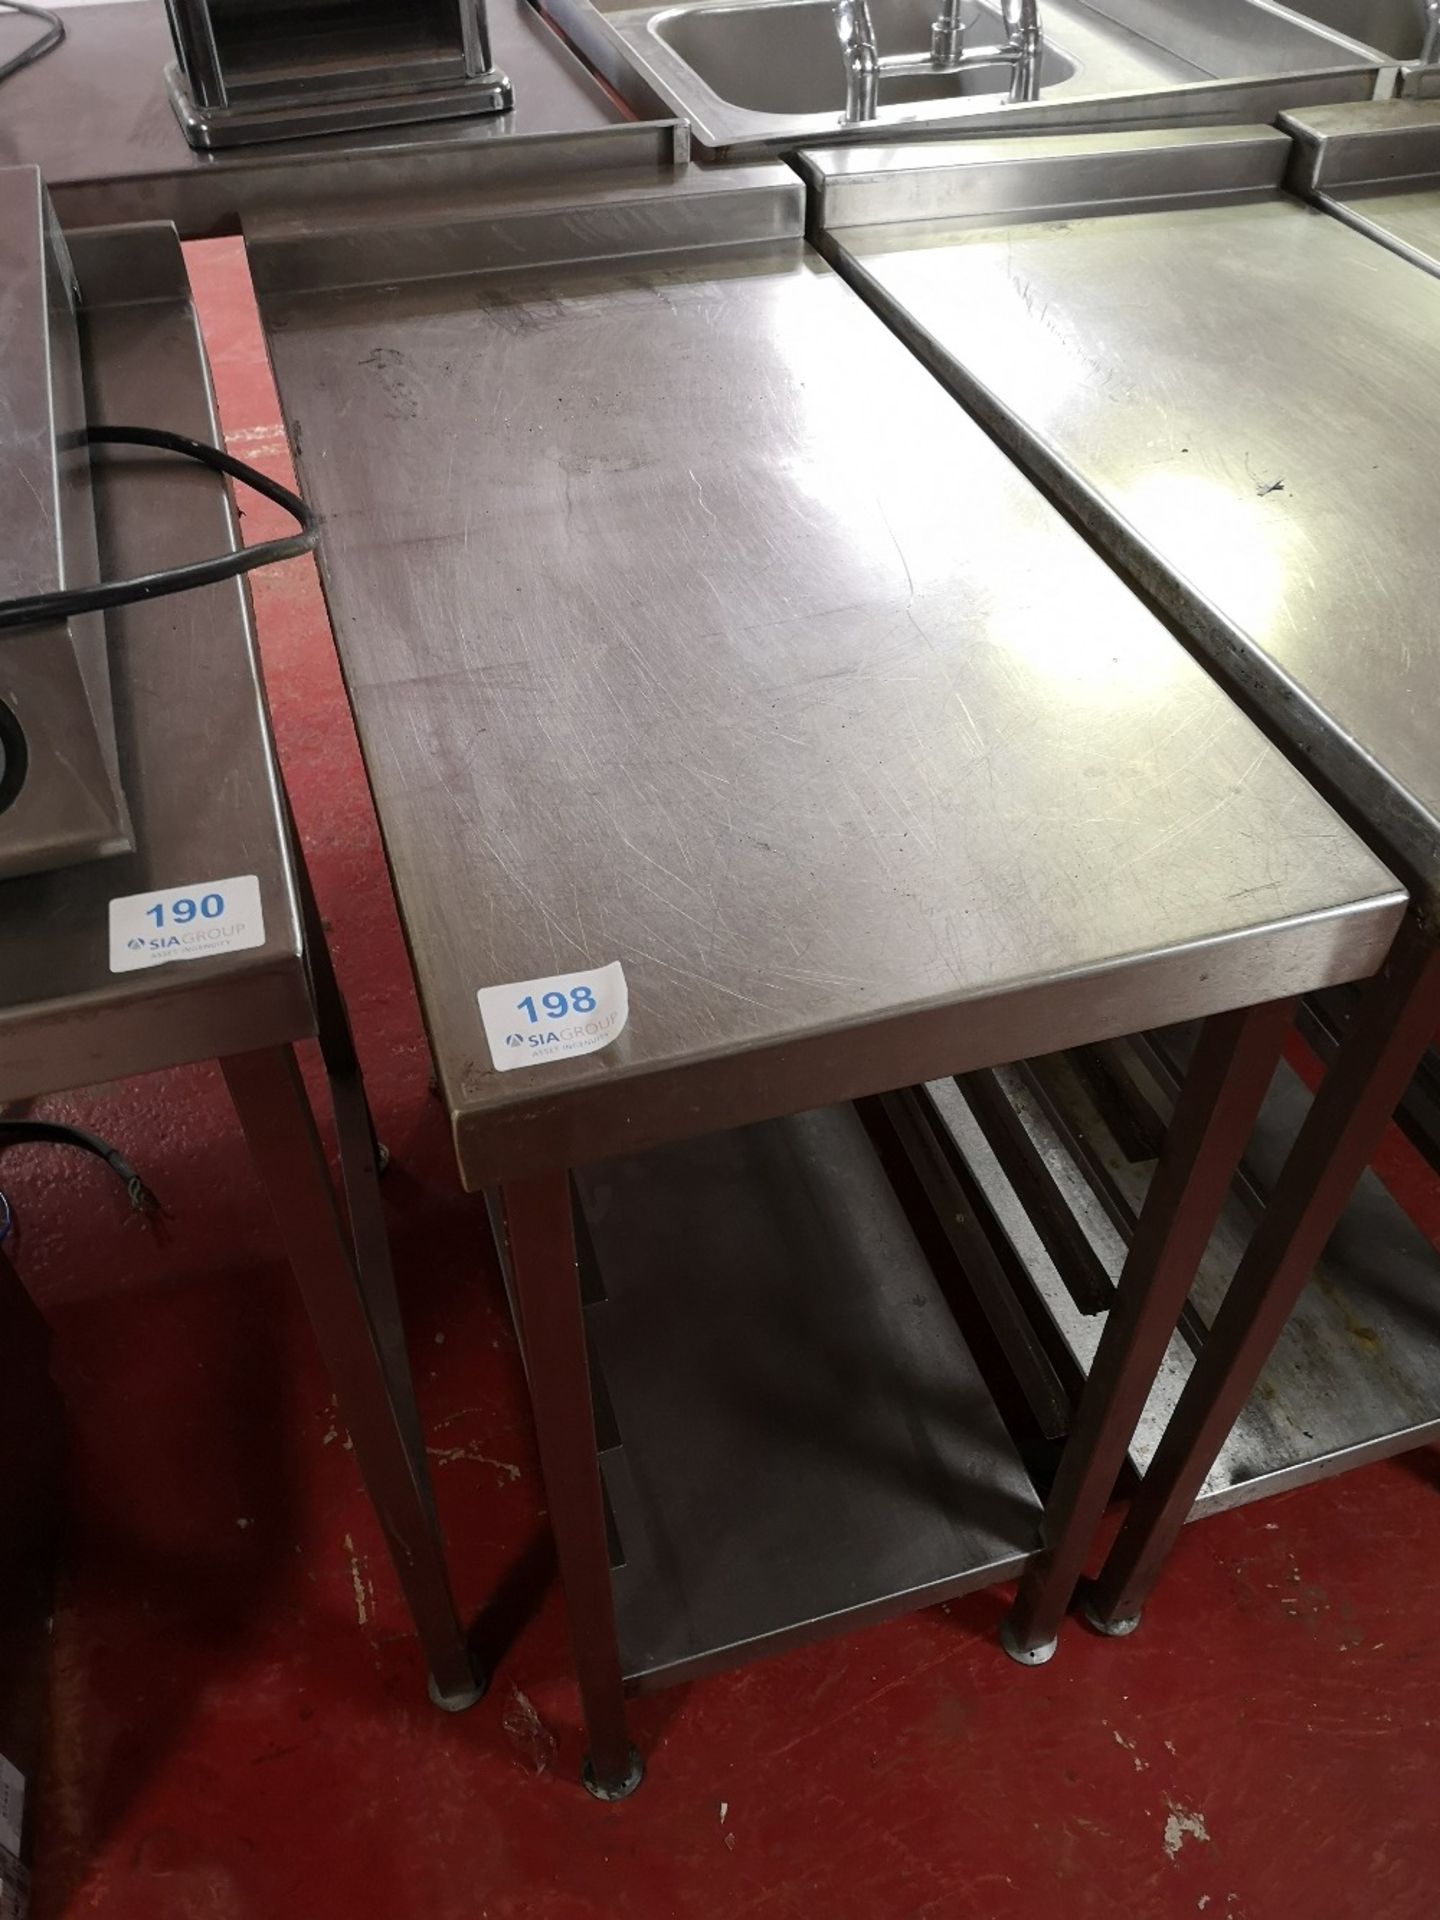 Stainless Steel Two Tier Fill in Table - Image 3 of 3